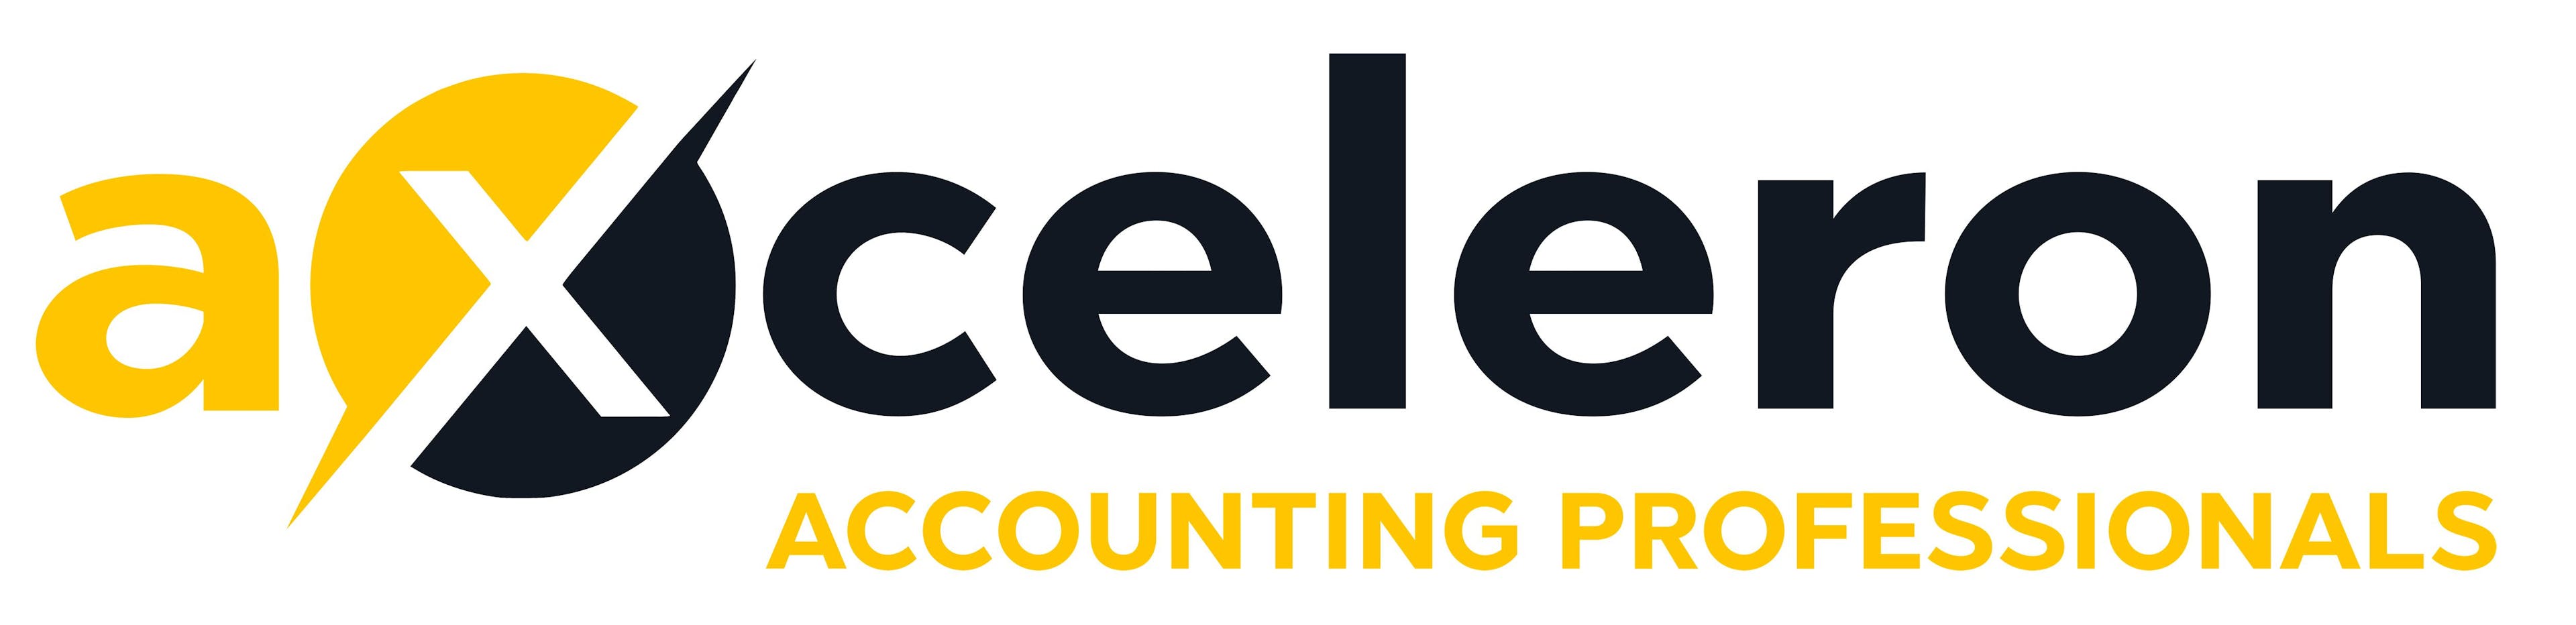 Axceleron Accounting Professionals logo